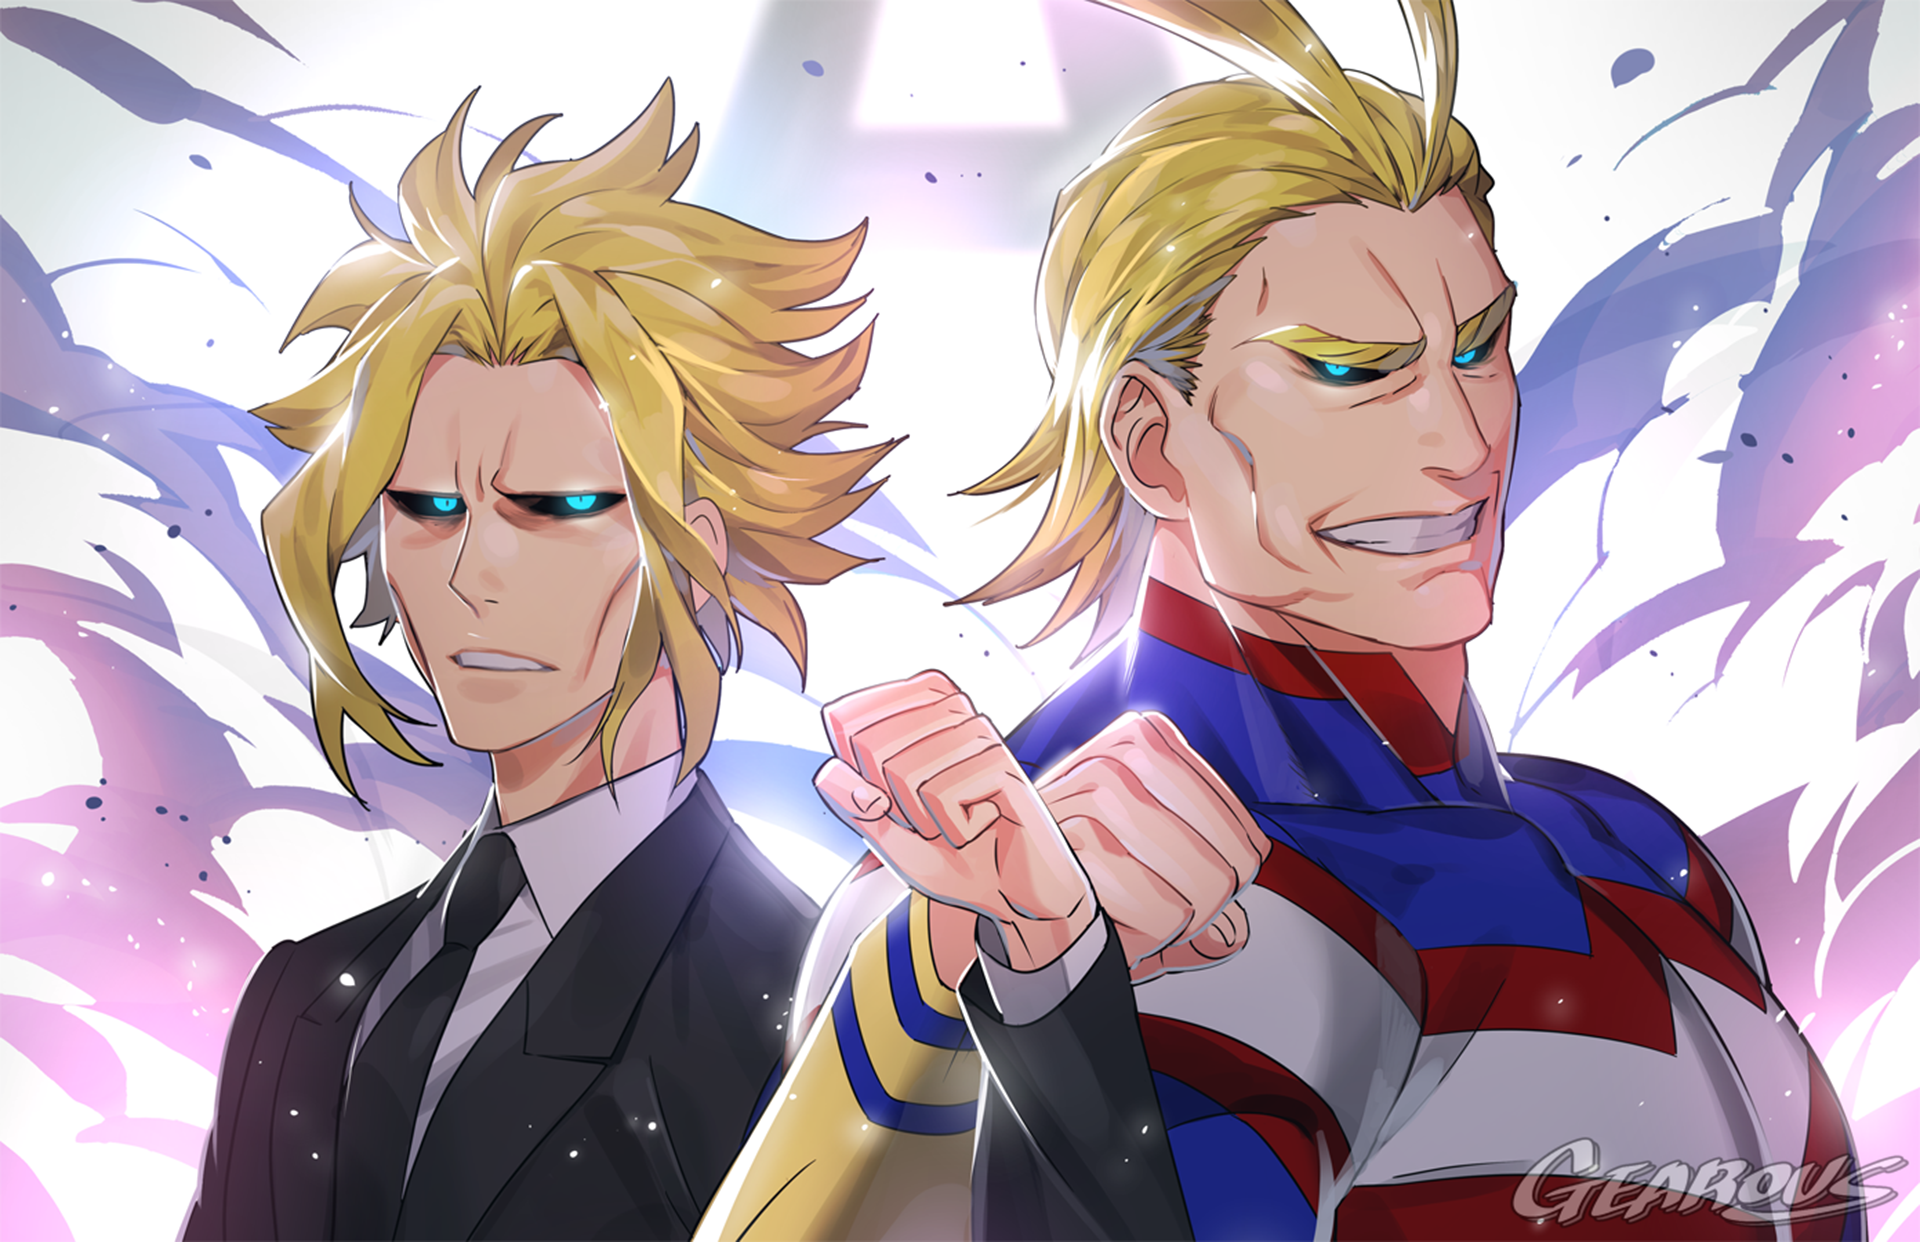 All Might by Gearous.